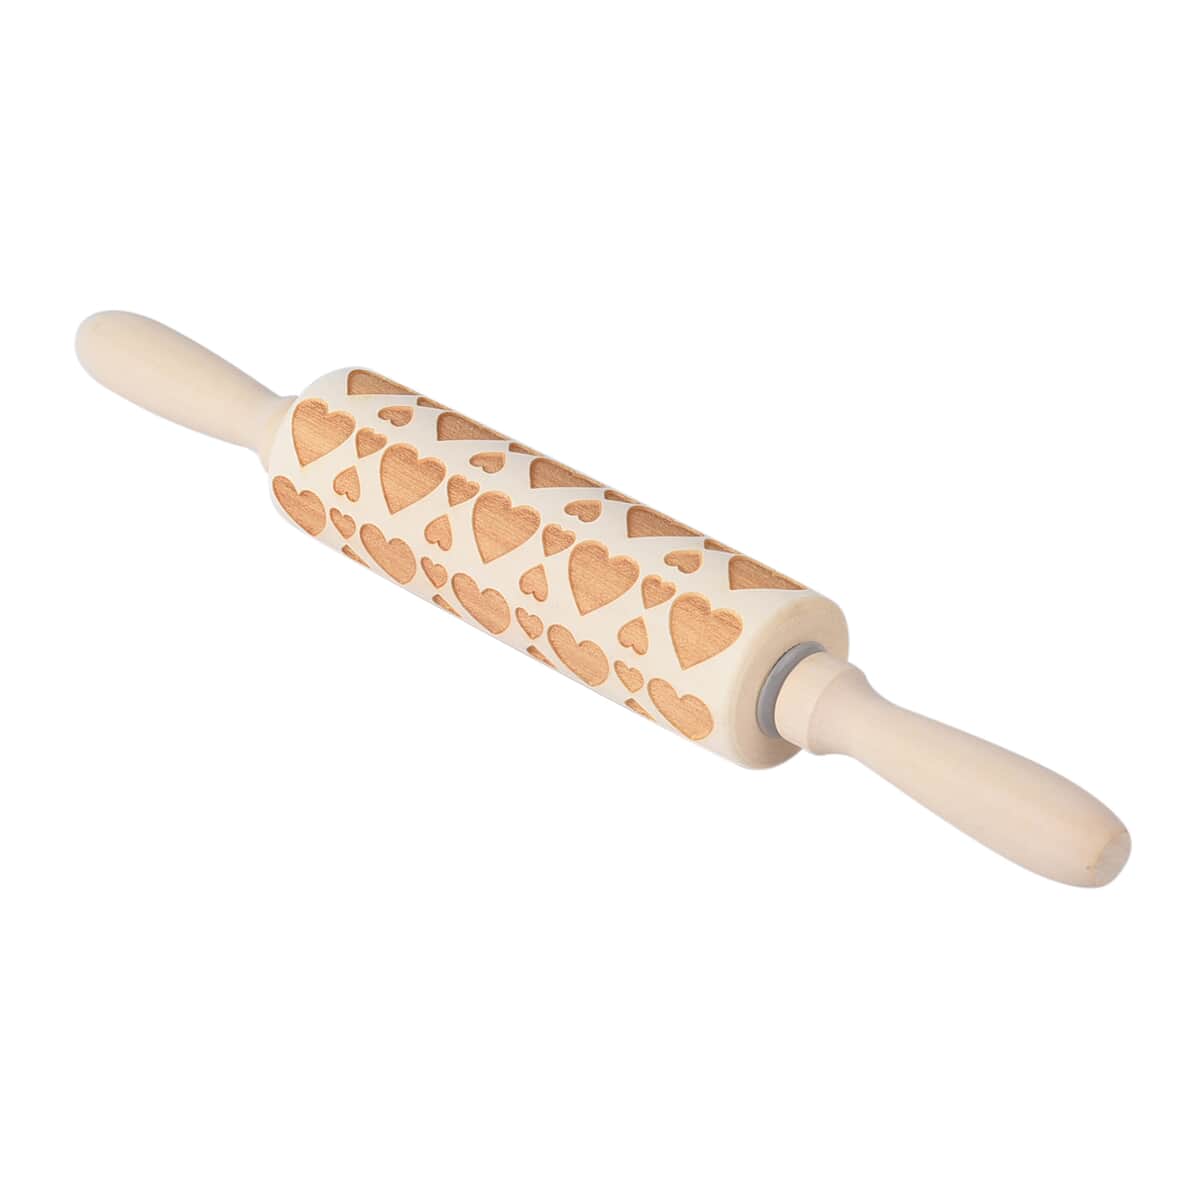 "rolling pin (heart) Material: wood Size:35x4.5cm cm/13.78x1.77 inch Weight: 180g Colour: wood" image number 6